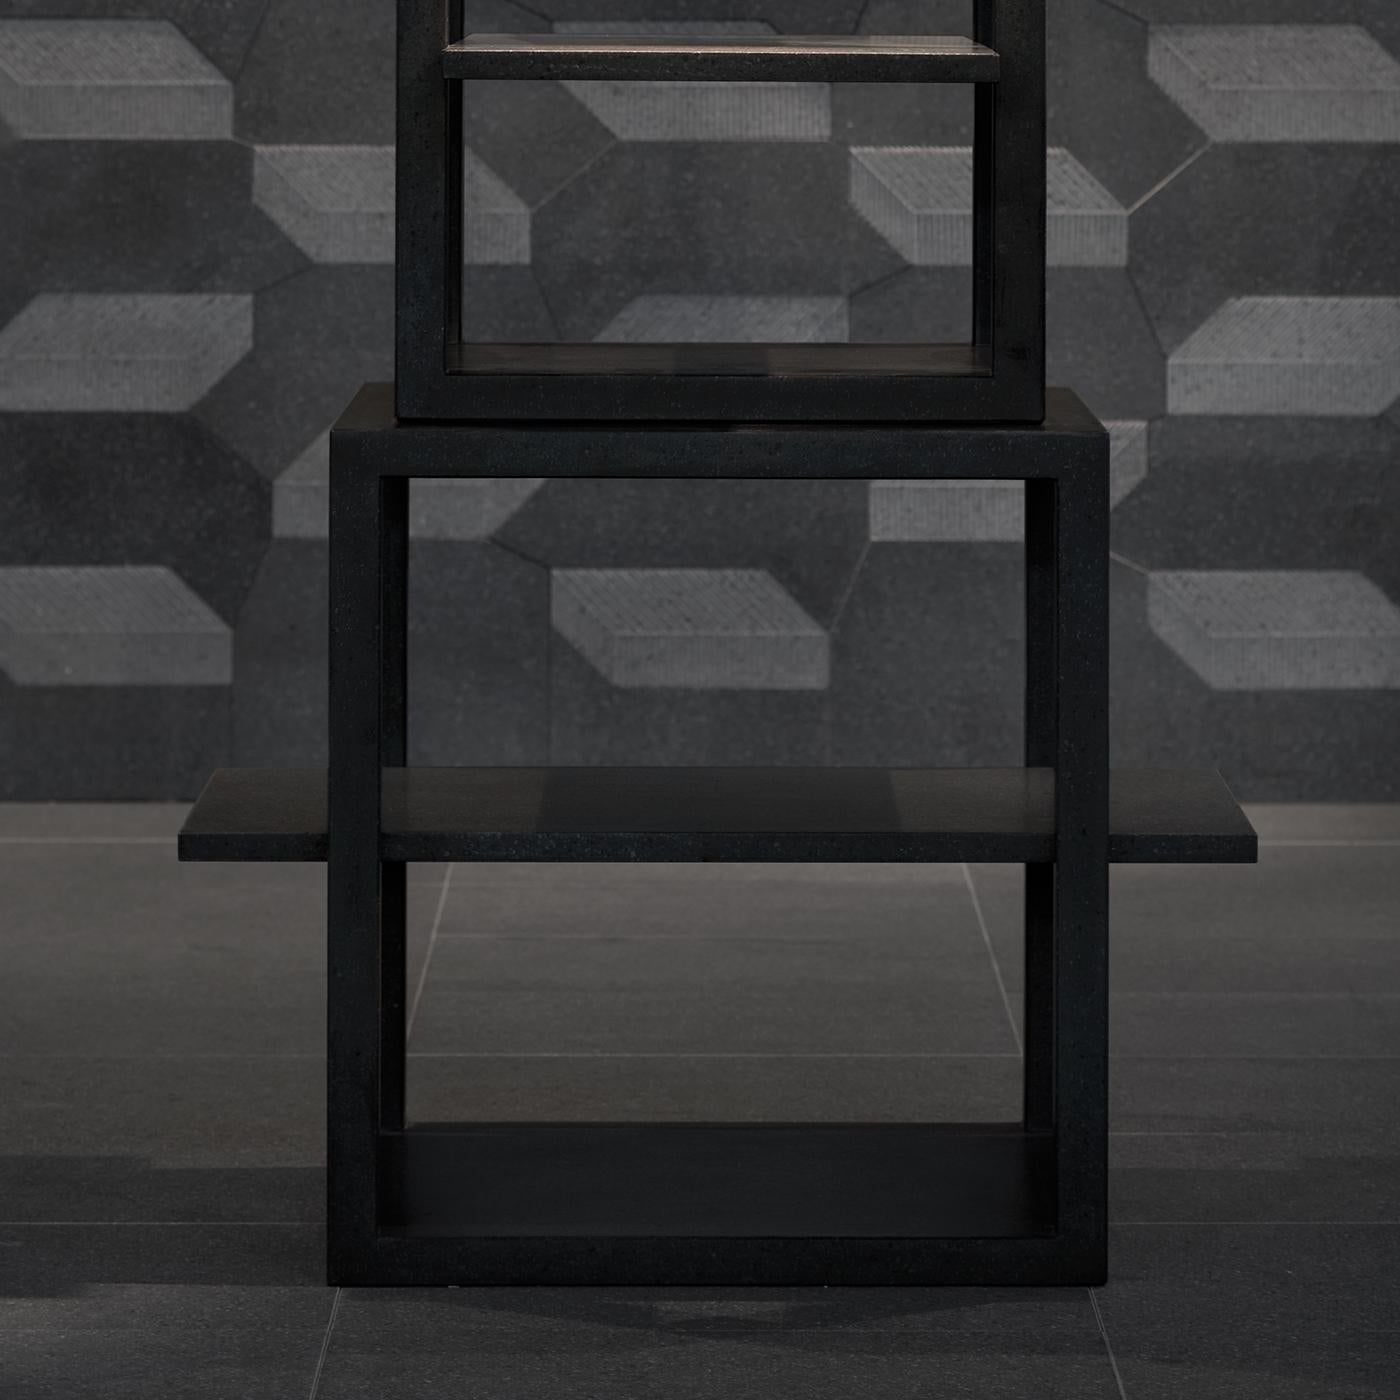 This contemporary bookshelf is entirely made of lava stone, fashioned by stacking four increasingly small and concentric hollow cubic shelves one on top of another. The trampolines protrude on horizontal axes, providing precious display surface. The